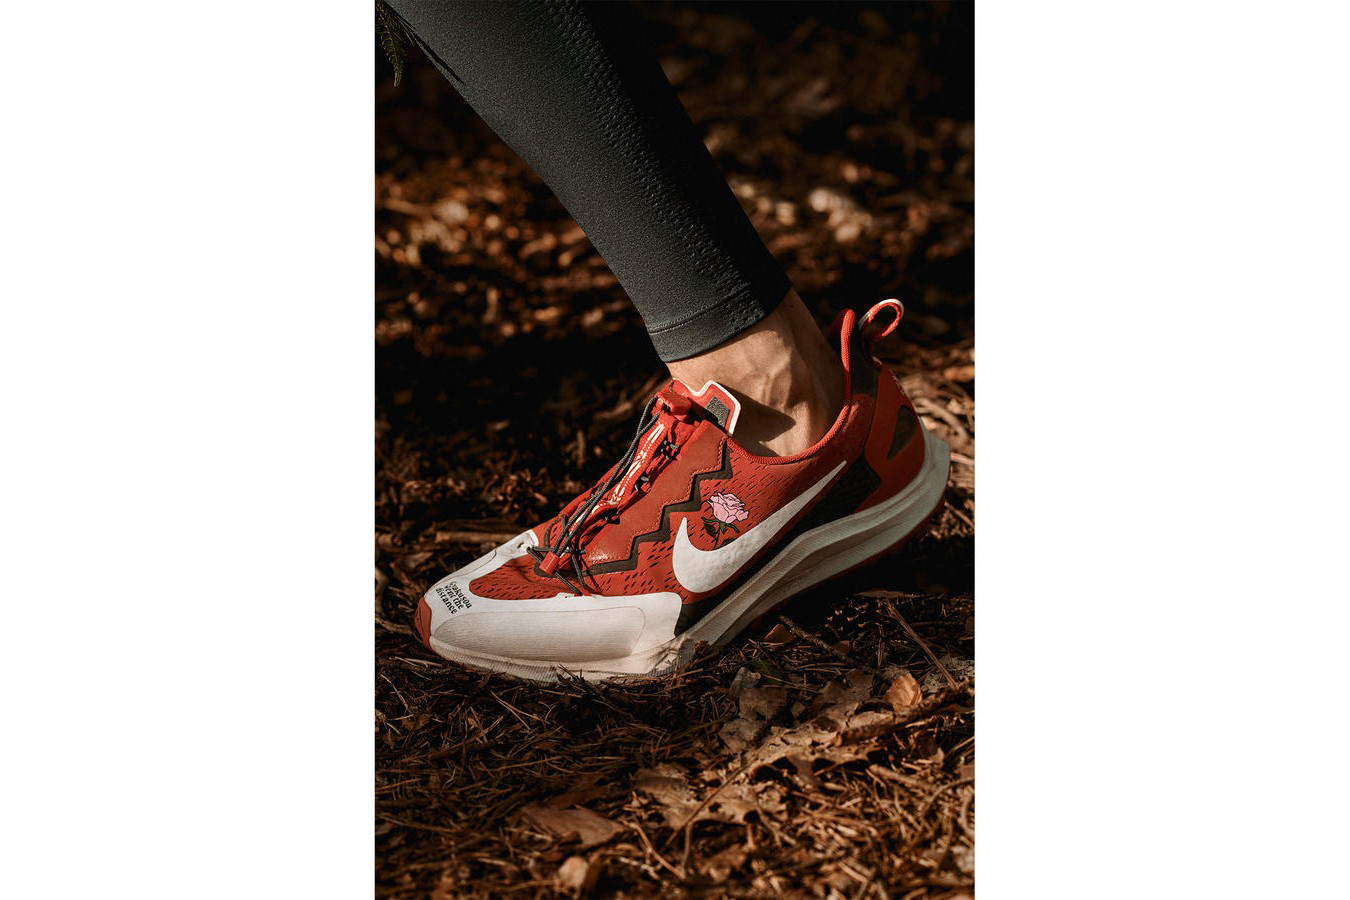 UNDERCOVER x Nike GYAKUSOU Pegasus 36 Trail Another Look | HYPEBEAST